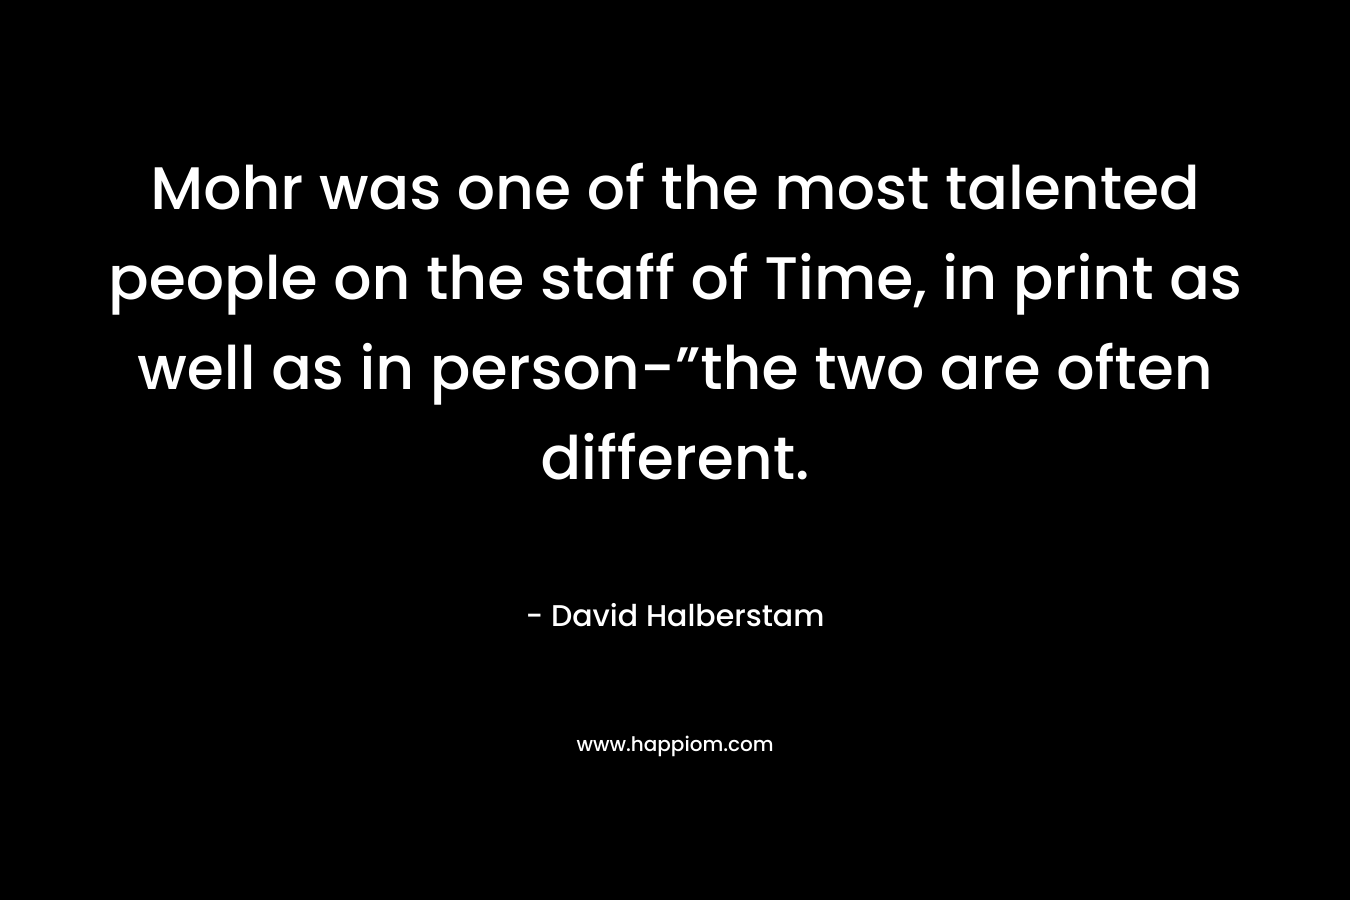 Mohr was one of the most talented people on the staff of Time, in print as well as in person-”the two are often different. – David Halberstam